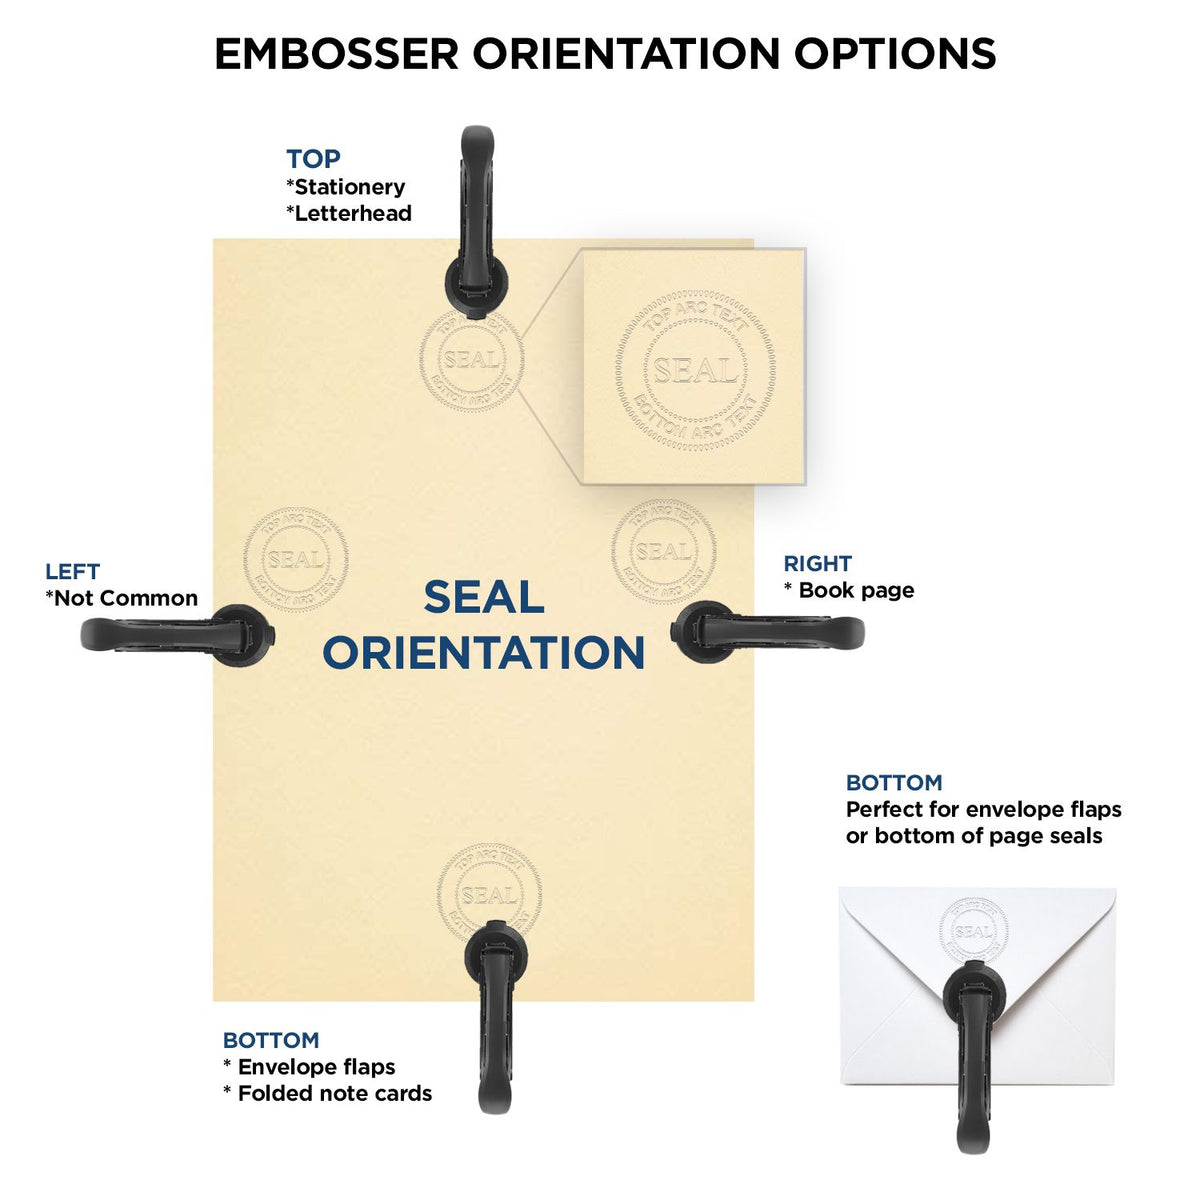 An infographic for the Massachusetts Engineer Desk Seal showing embosser orientation, this is showing examples of a top, bottom, right and left insert.